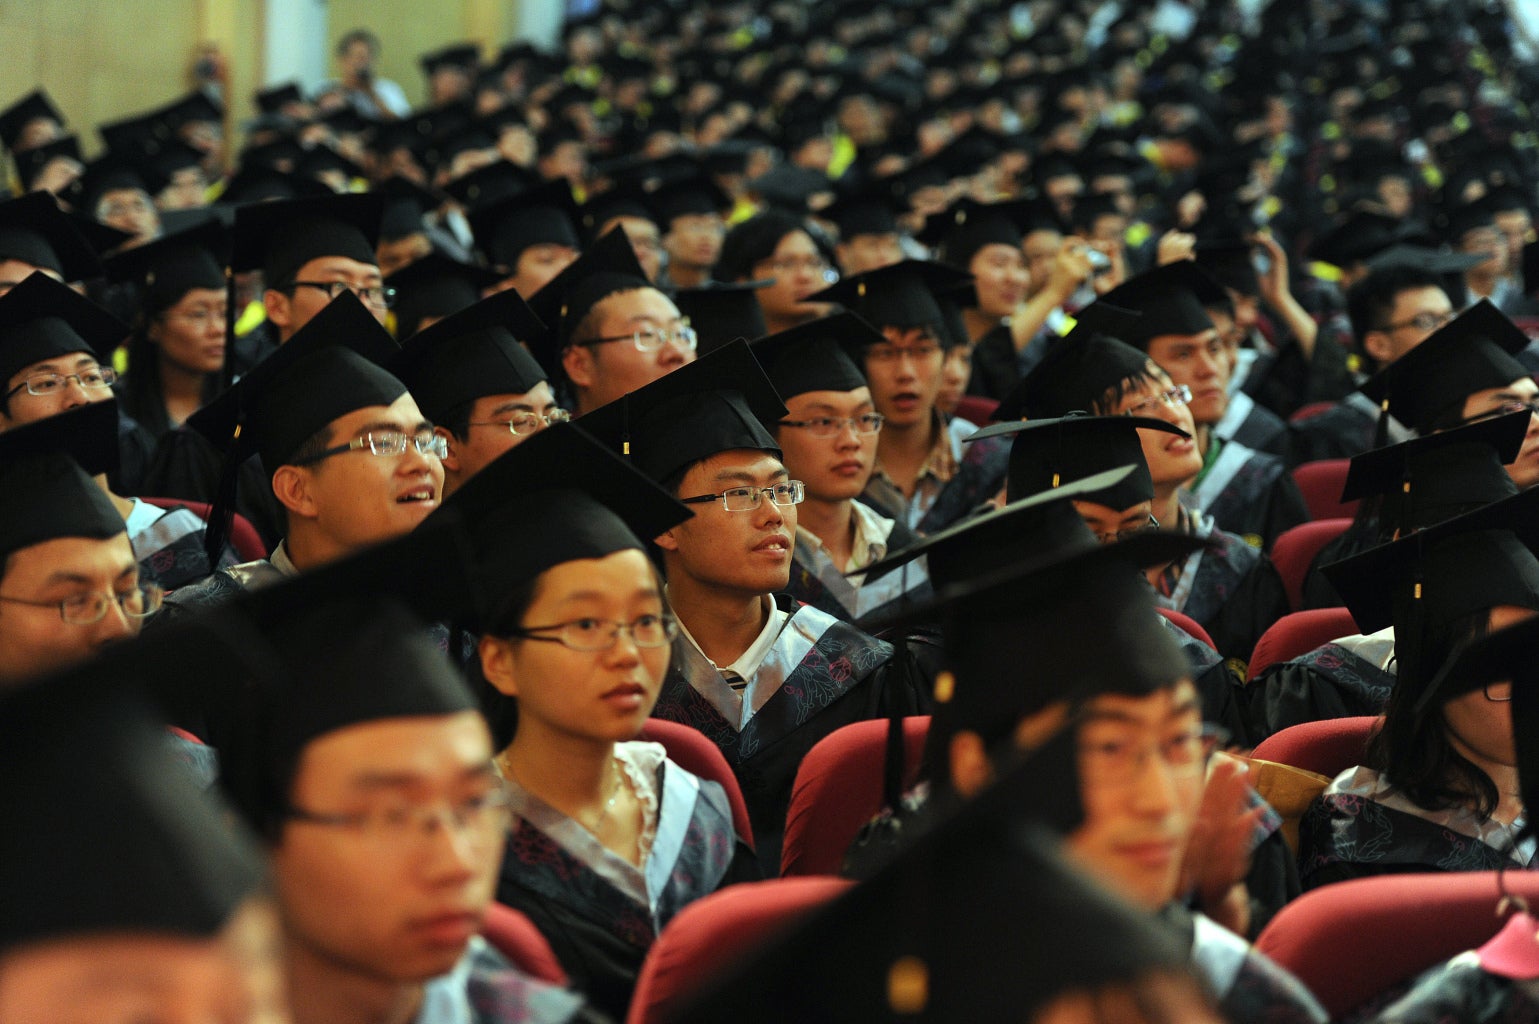 Education Ministry Allocates Extra 1,000 Matriculation Spots for B40 Chinese Students - WORLD OF BUZZ 2